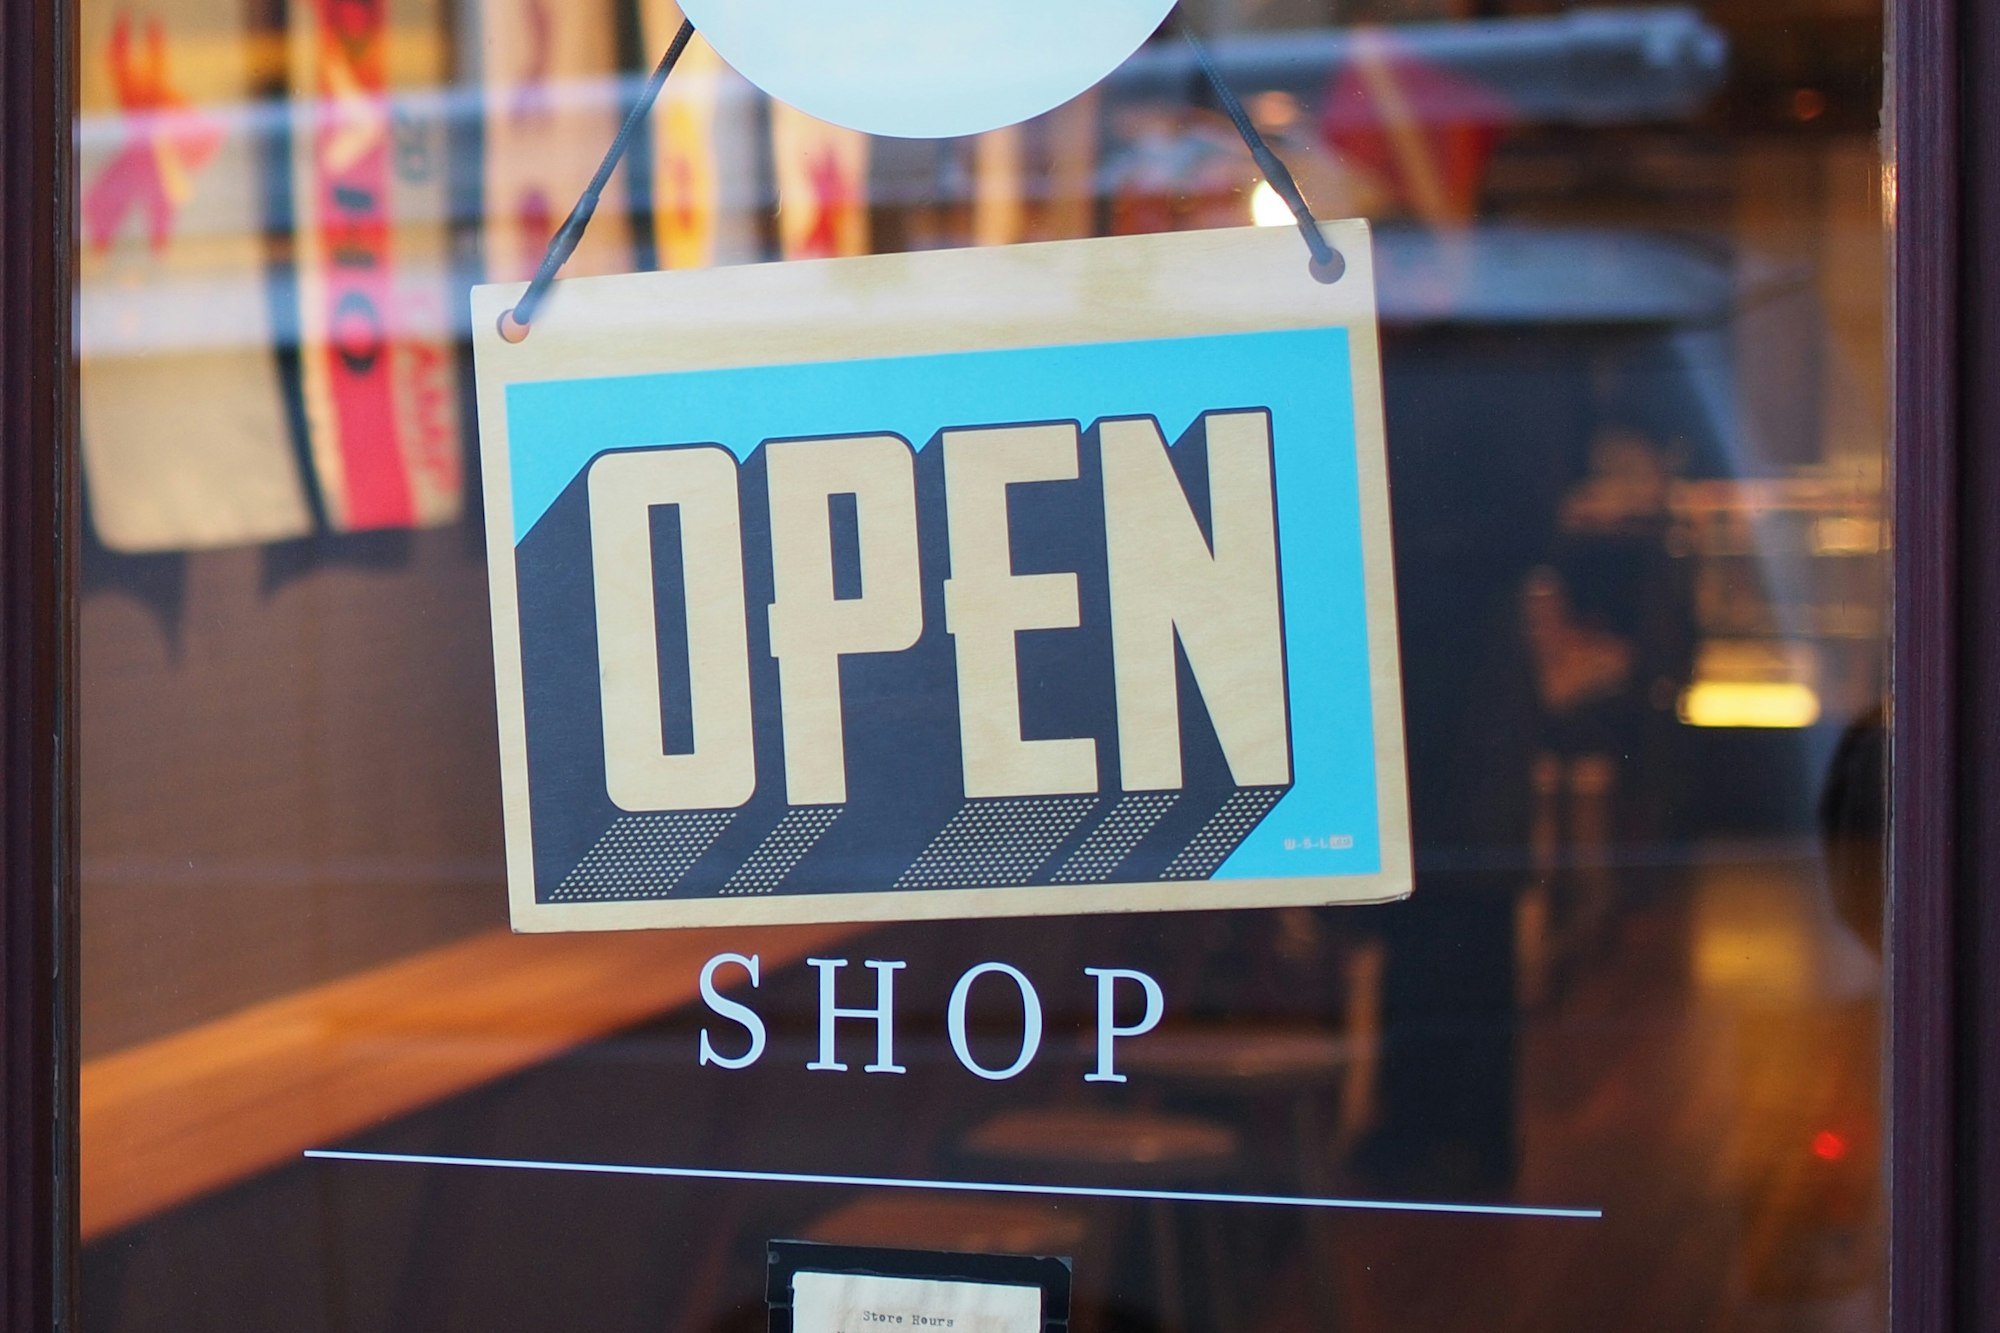 What Small Businesses Are Eligible For SBA Loans?